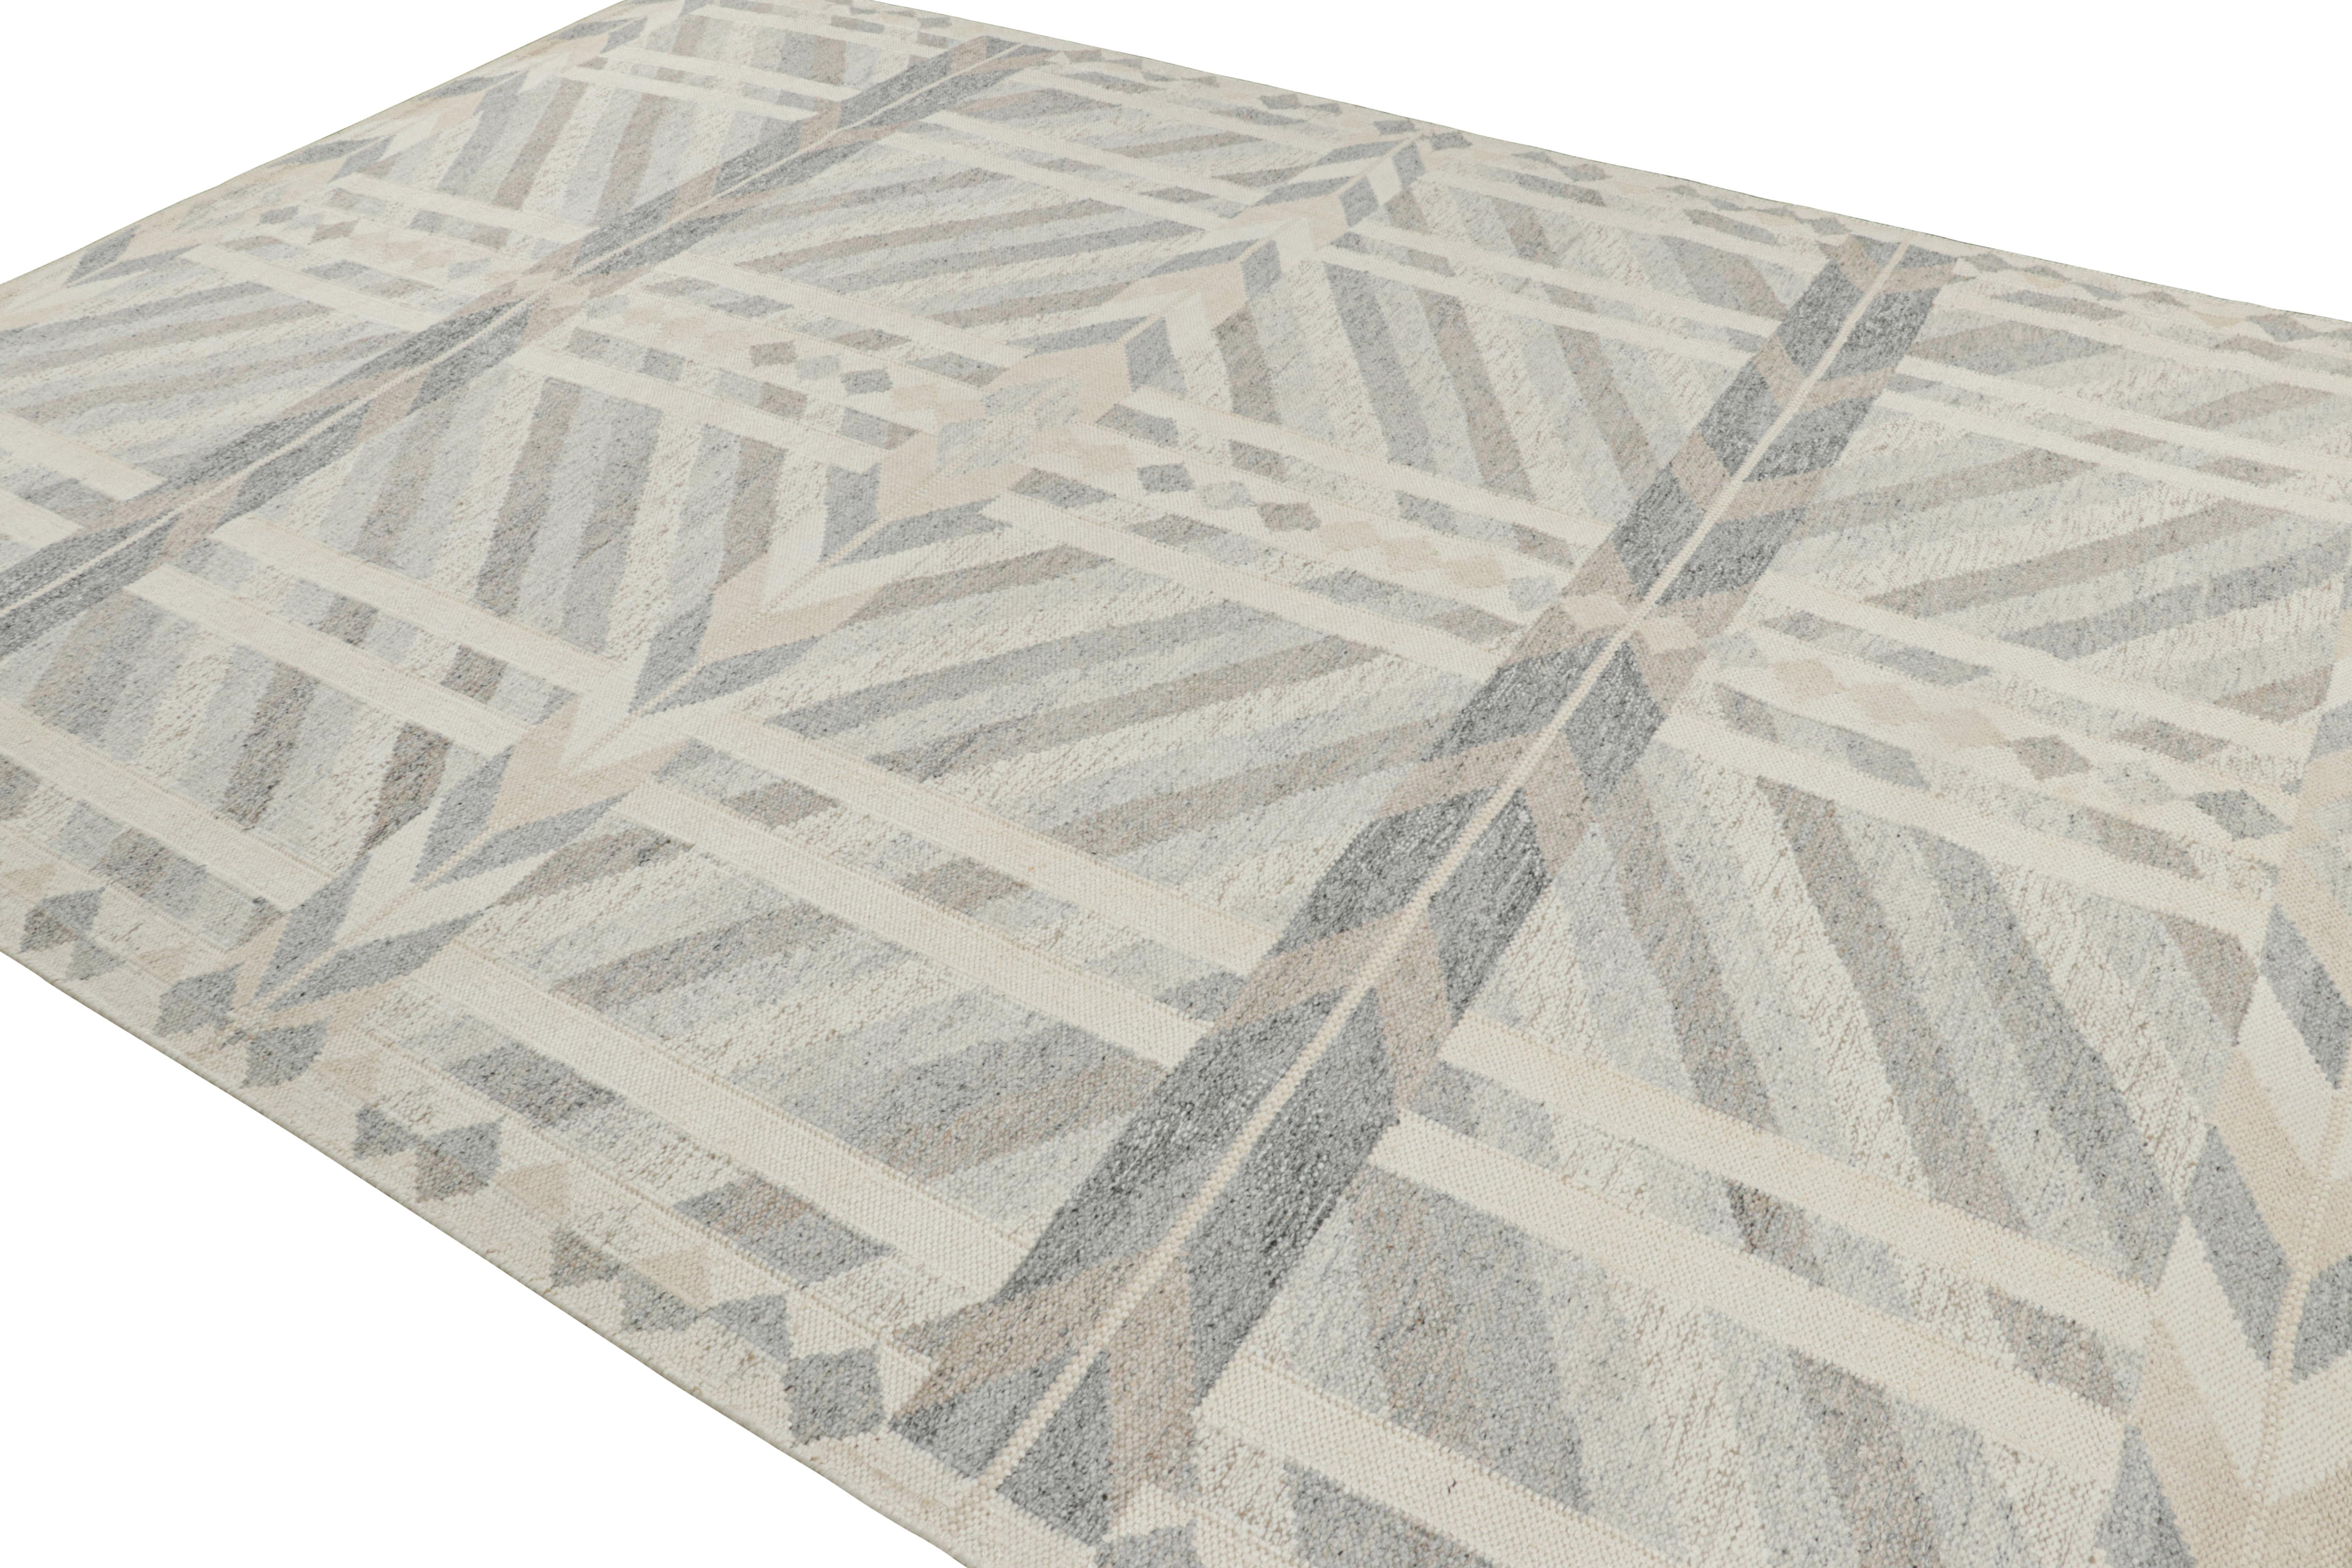 Indian Rug & Kilim’s Scandinavian Style Rug in Gray Beige and White Geometric Patterns For Sale